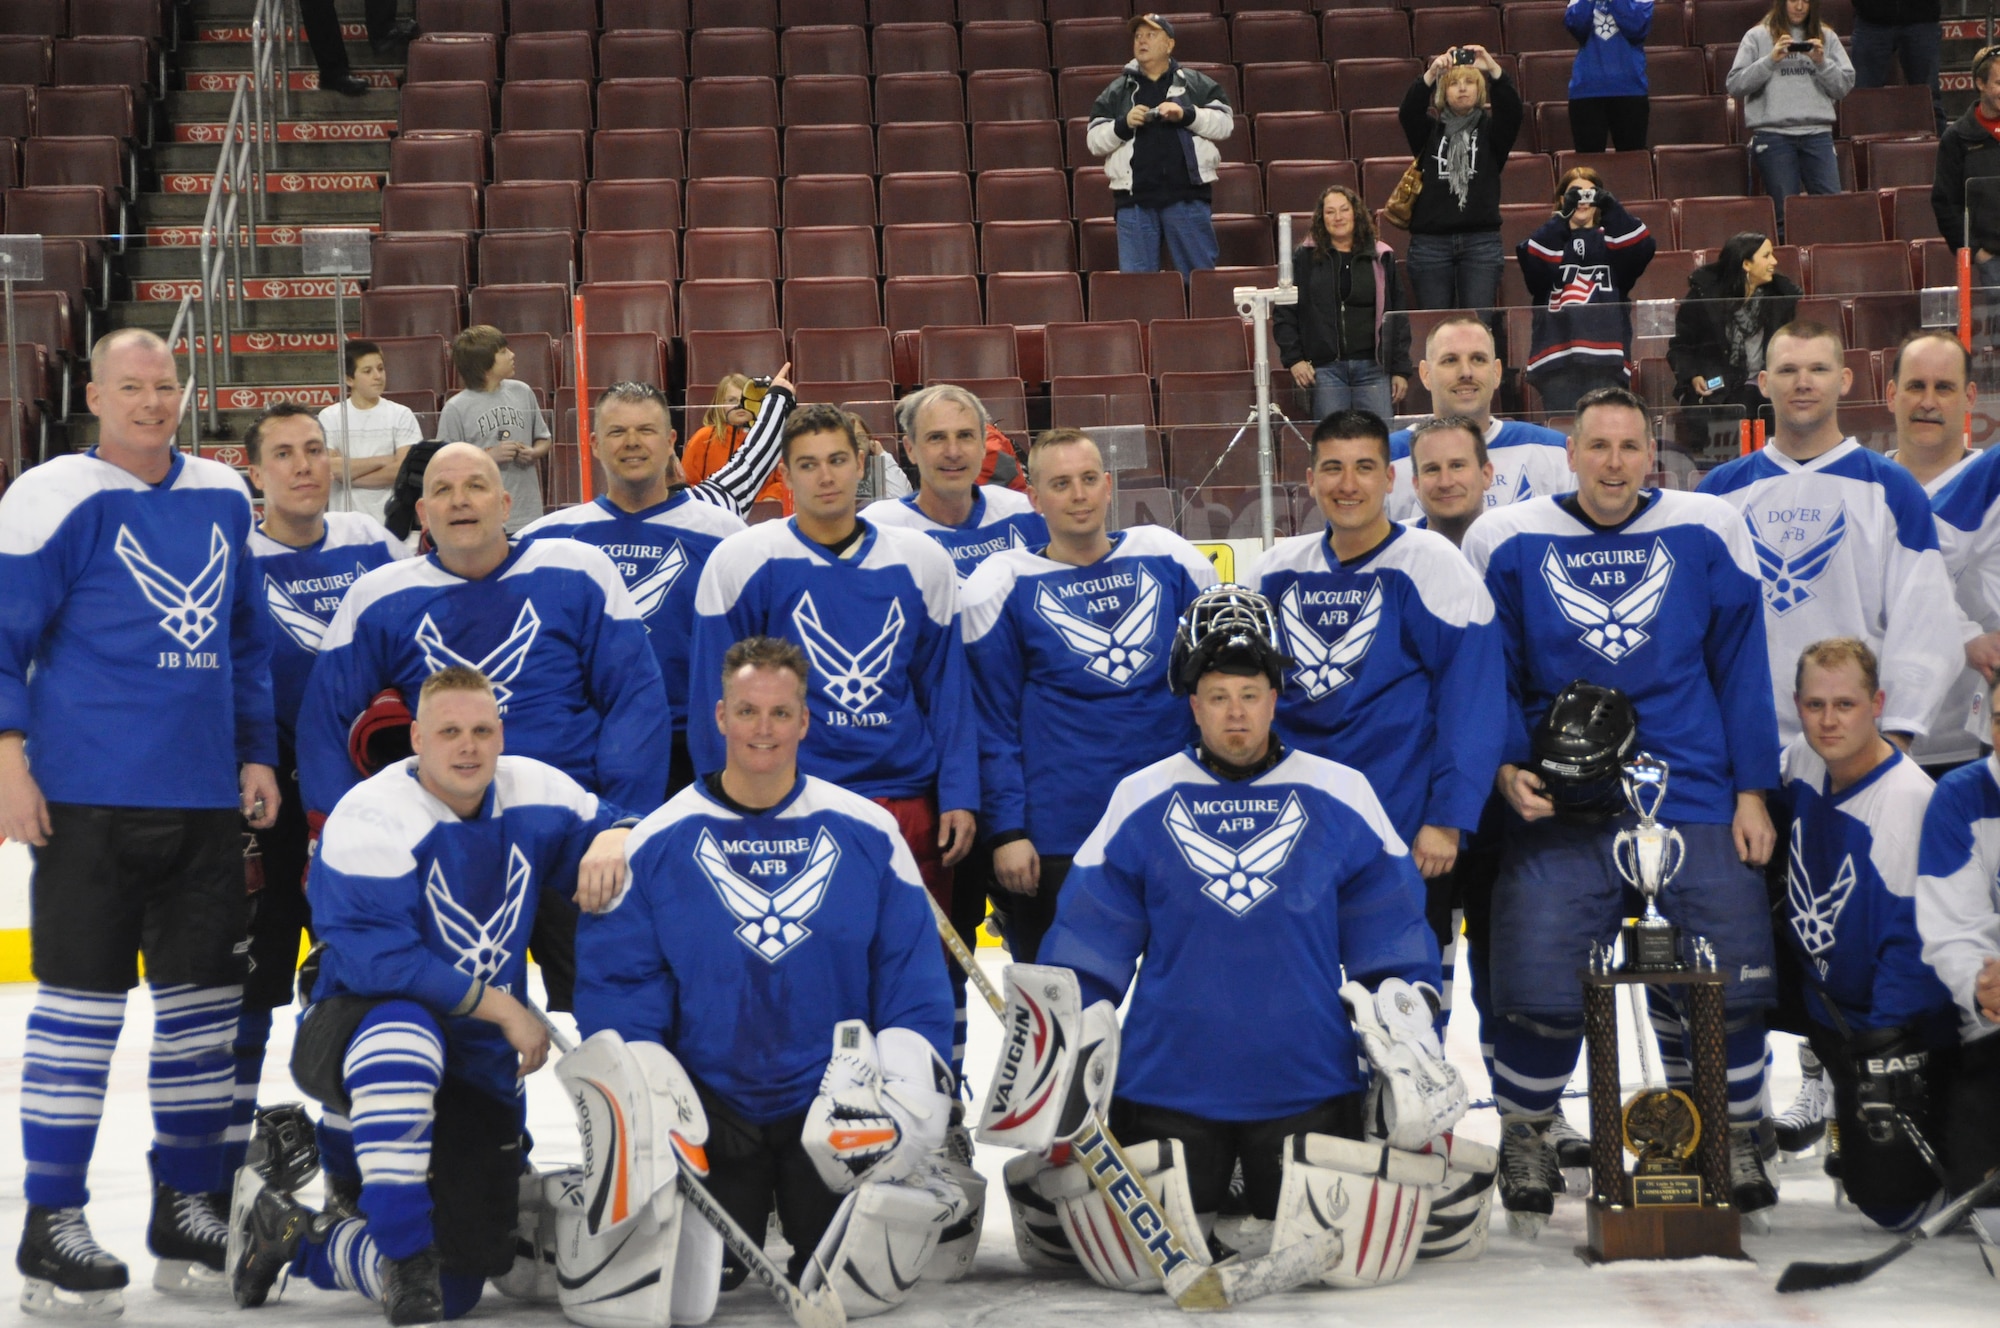 JOINT BASE MCGUIRE-DIX-LAKEHURST, N.J. - The Joint Base McGuire-Dix-Lakehurst All Stars here, win the 4th annual charity ice hockey fundraiser game against the Dover All Stars teams from  Dover Air Force Base, Del. The game was held March 12 at the Wells Fargo Center in Philadelphia, Pa. Combined, the teams raised $1,250 for the Combined Federal Campaign Airmen Memorial Foundation.(U.S. Air Force photo/Master Sgt. Donna T. Jeffries)